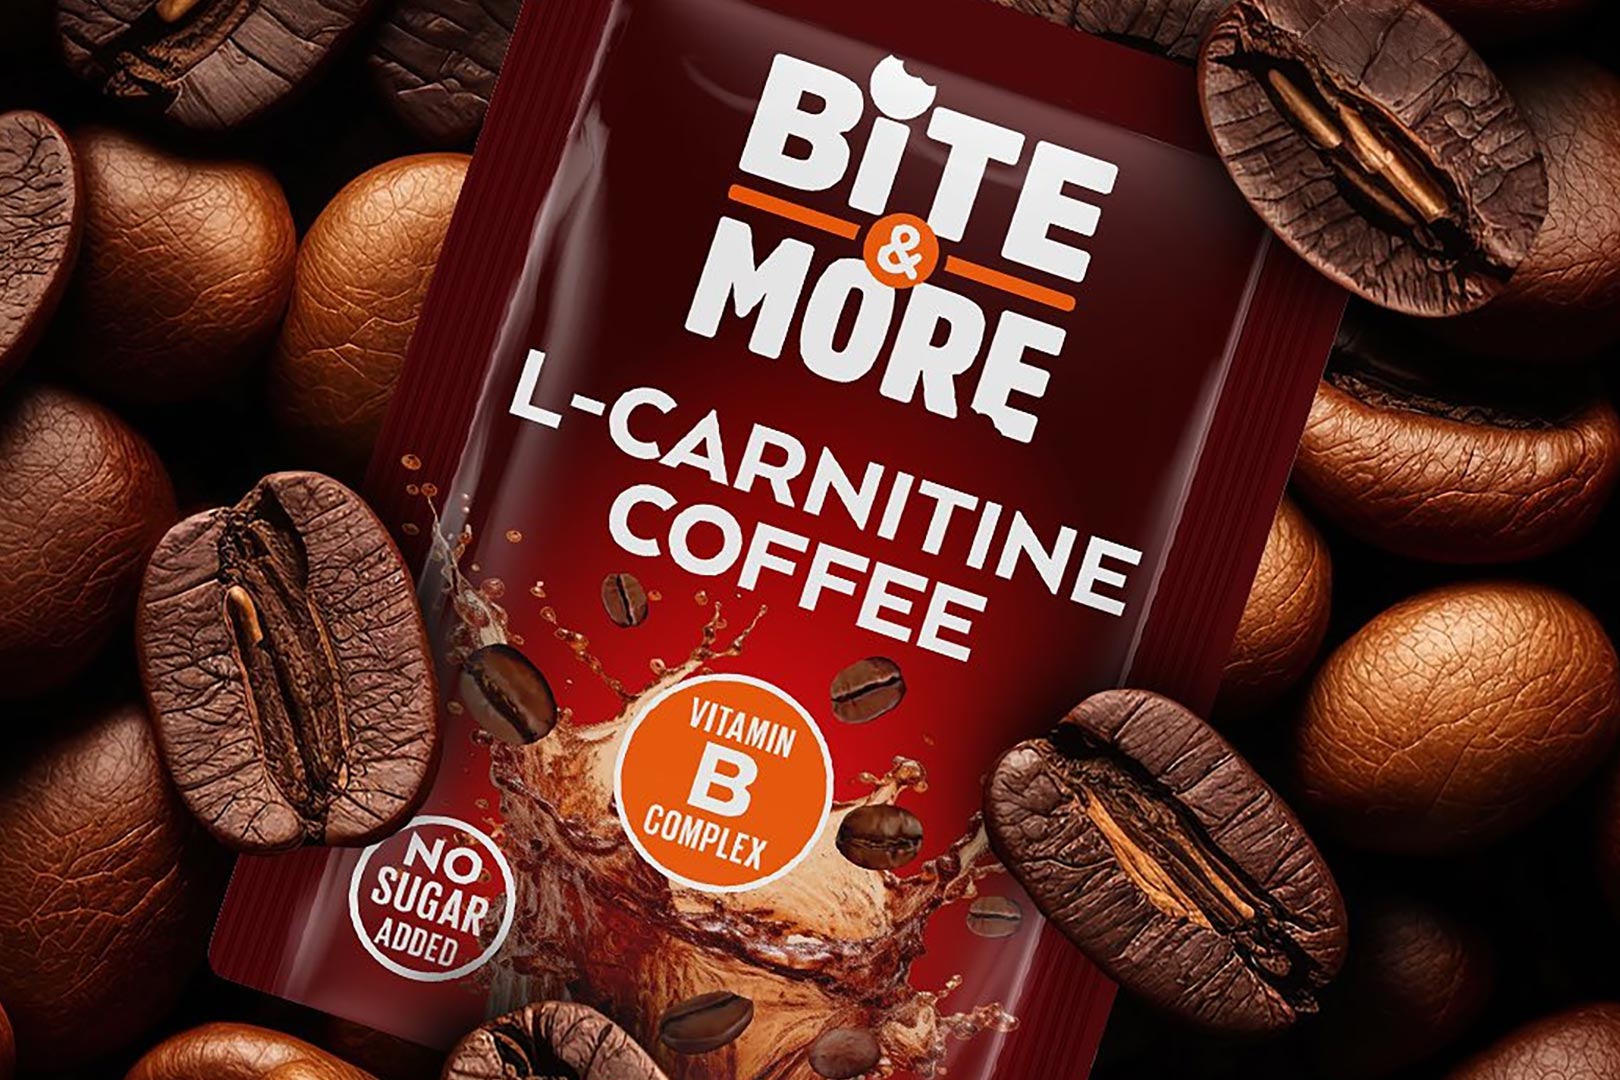 Bite And More Unveils Carnitine Coffee